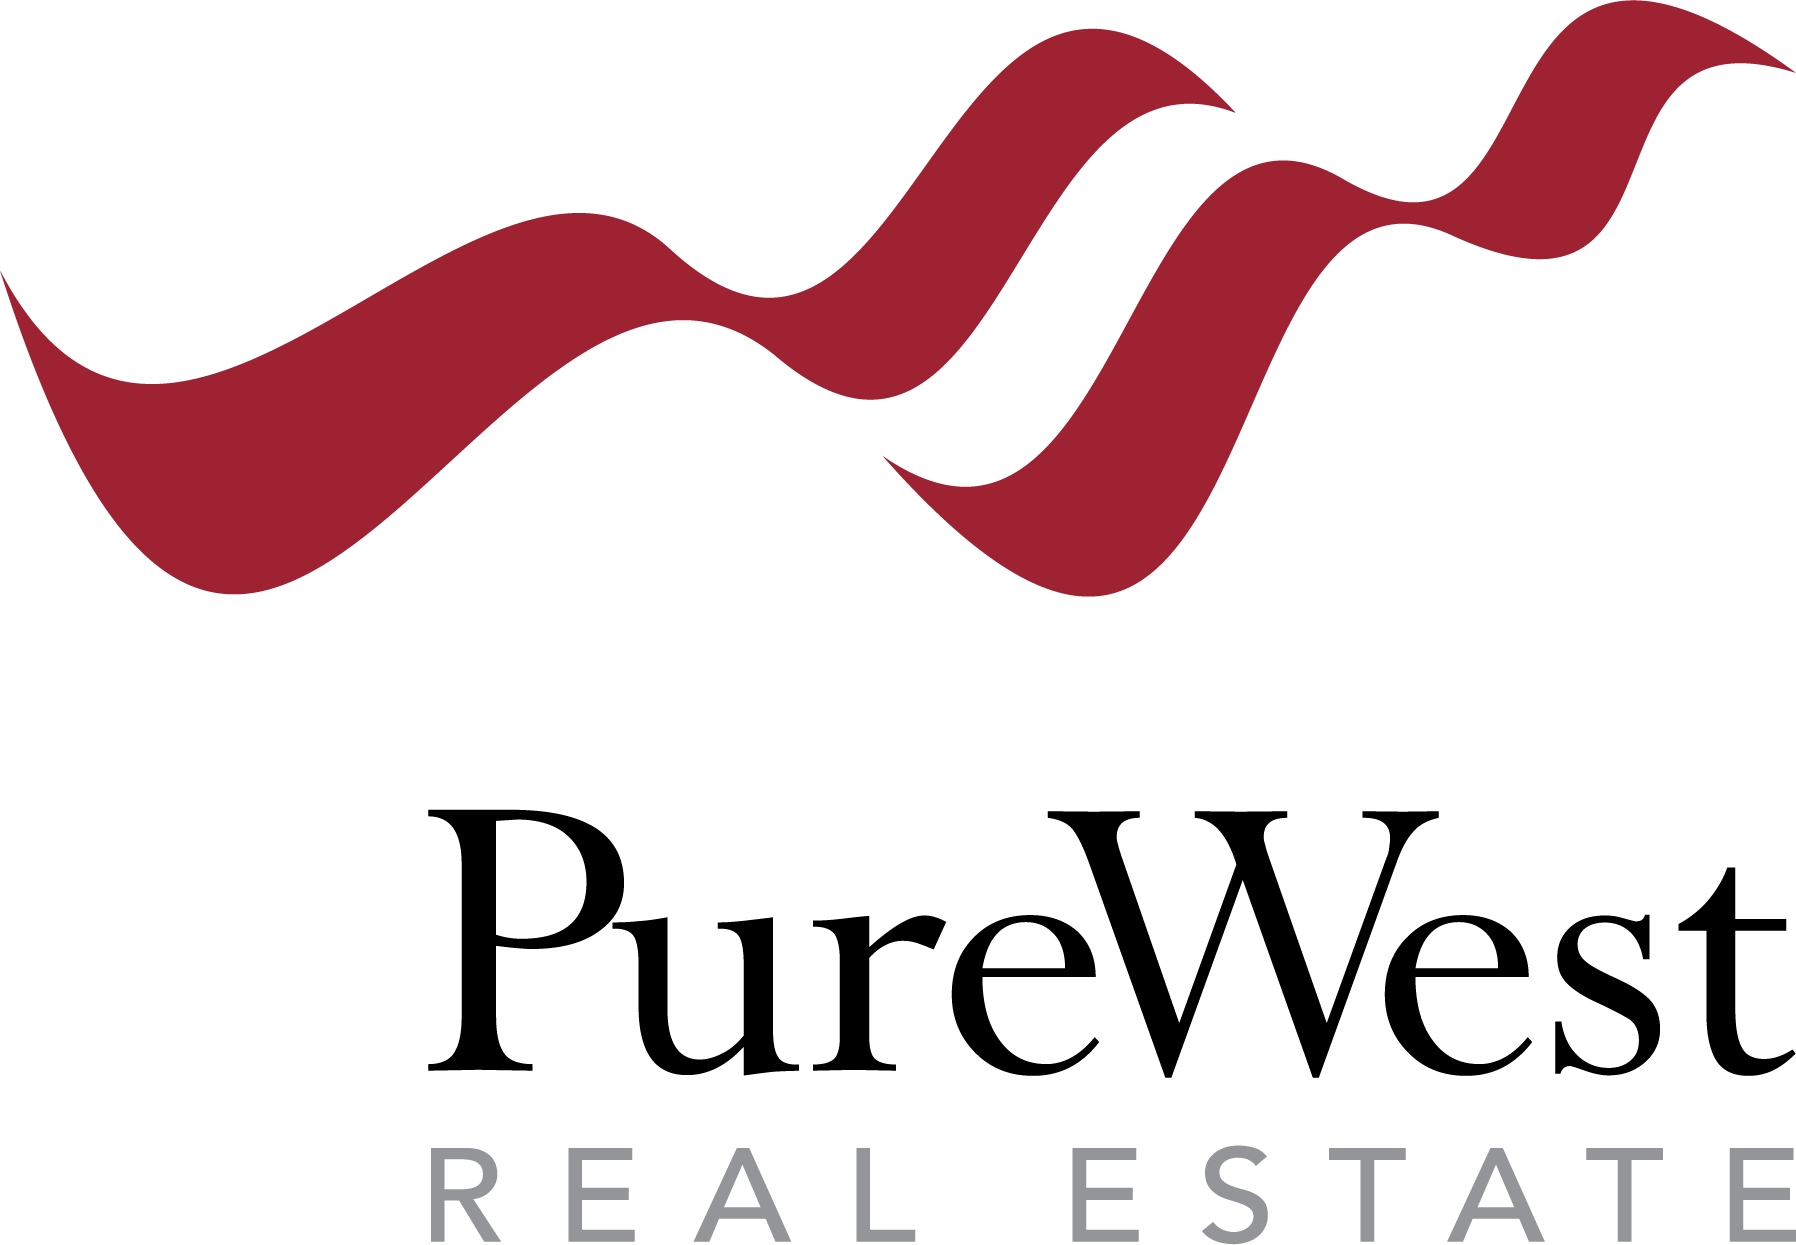 Mary Hoffman - Pure West Real Estate Logo